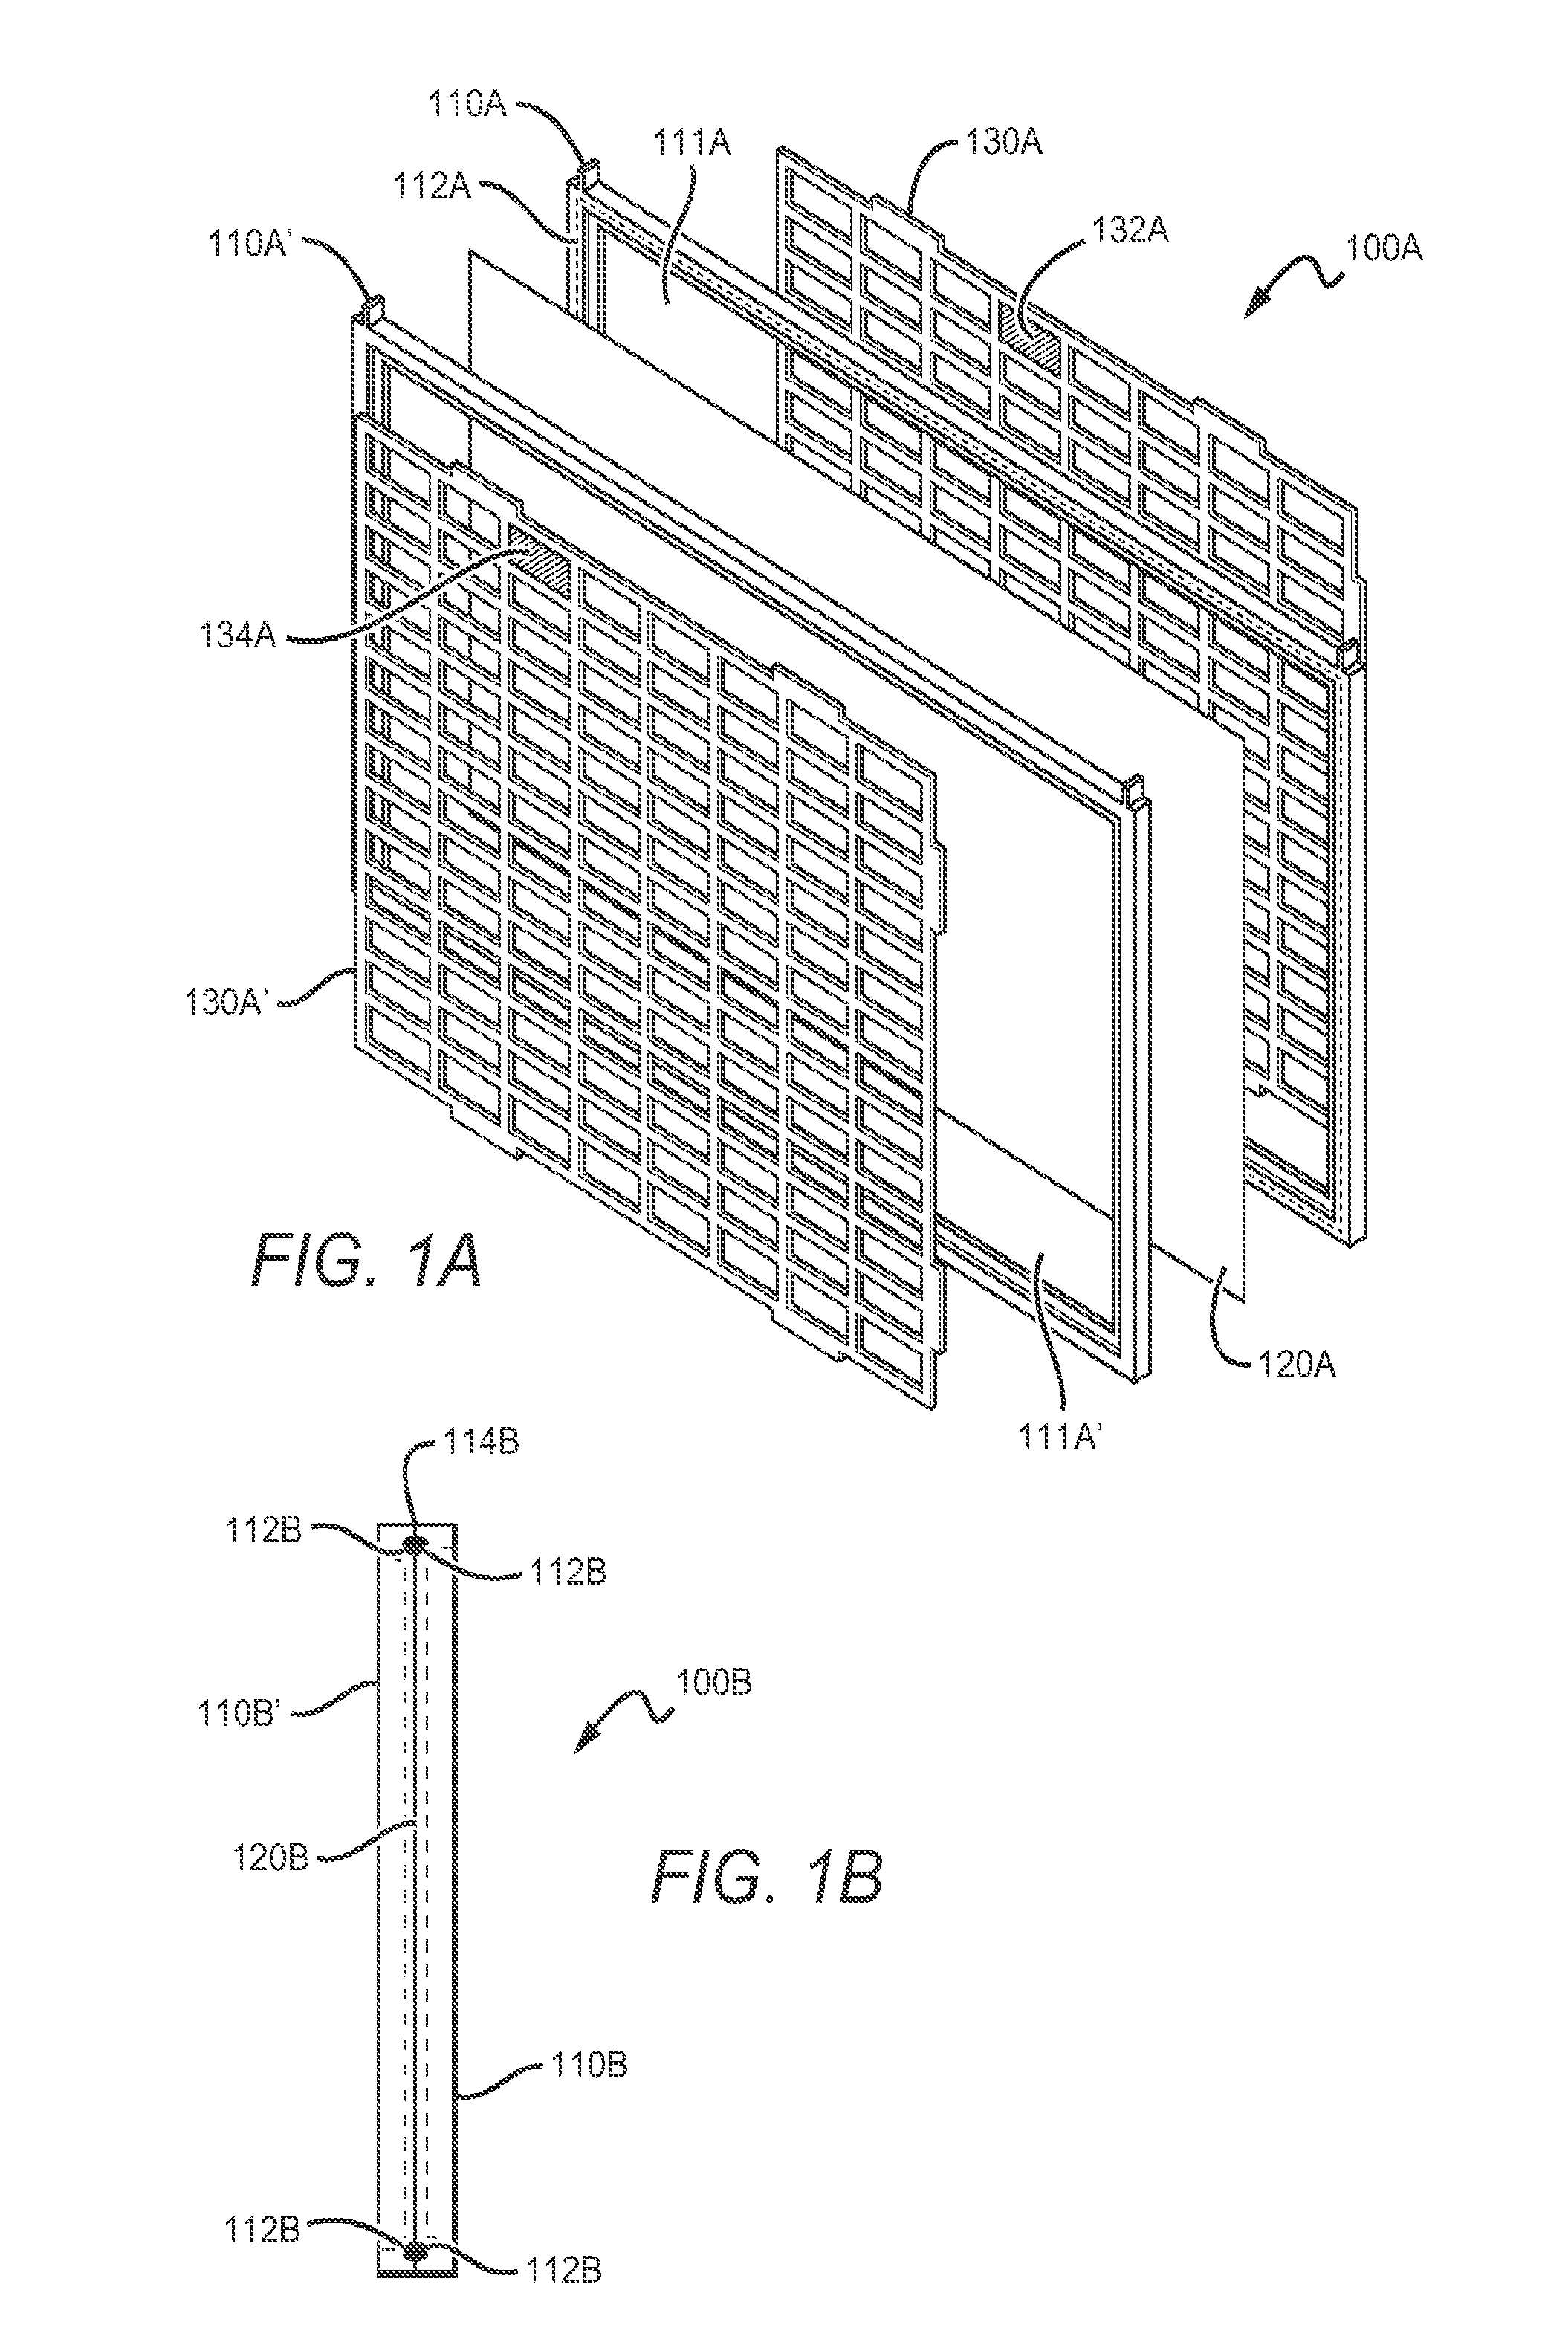 Light-weight bipolar valve regulated lead acid batteries and methods therefor